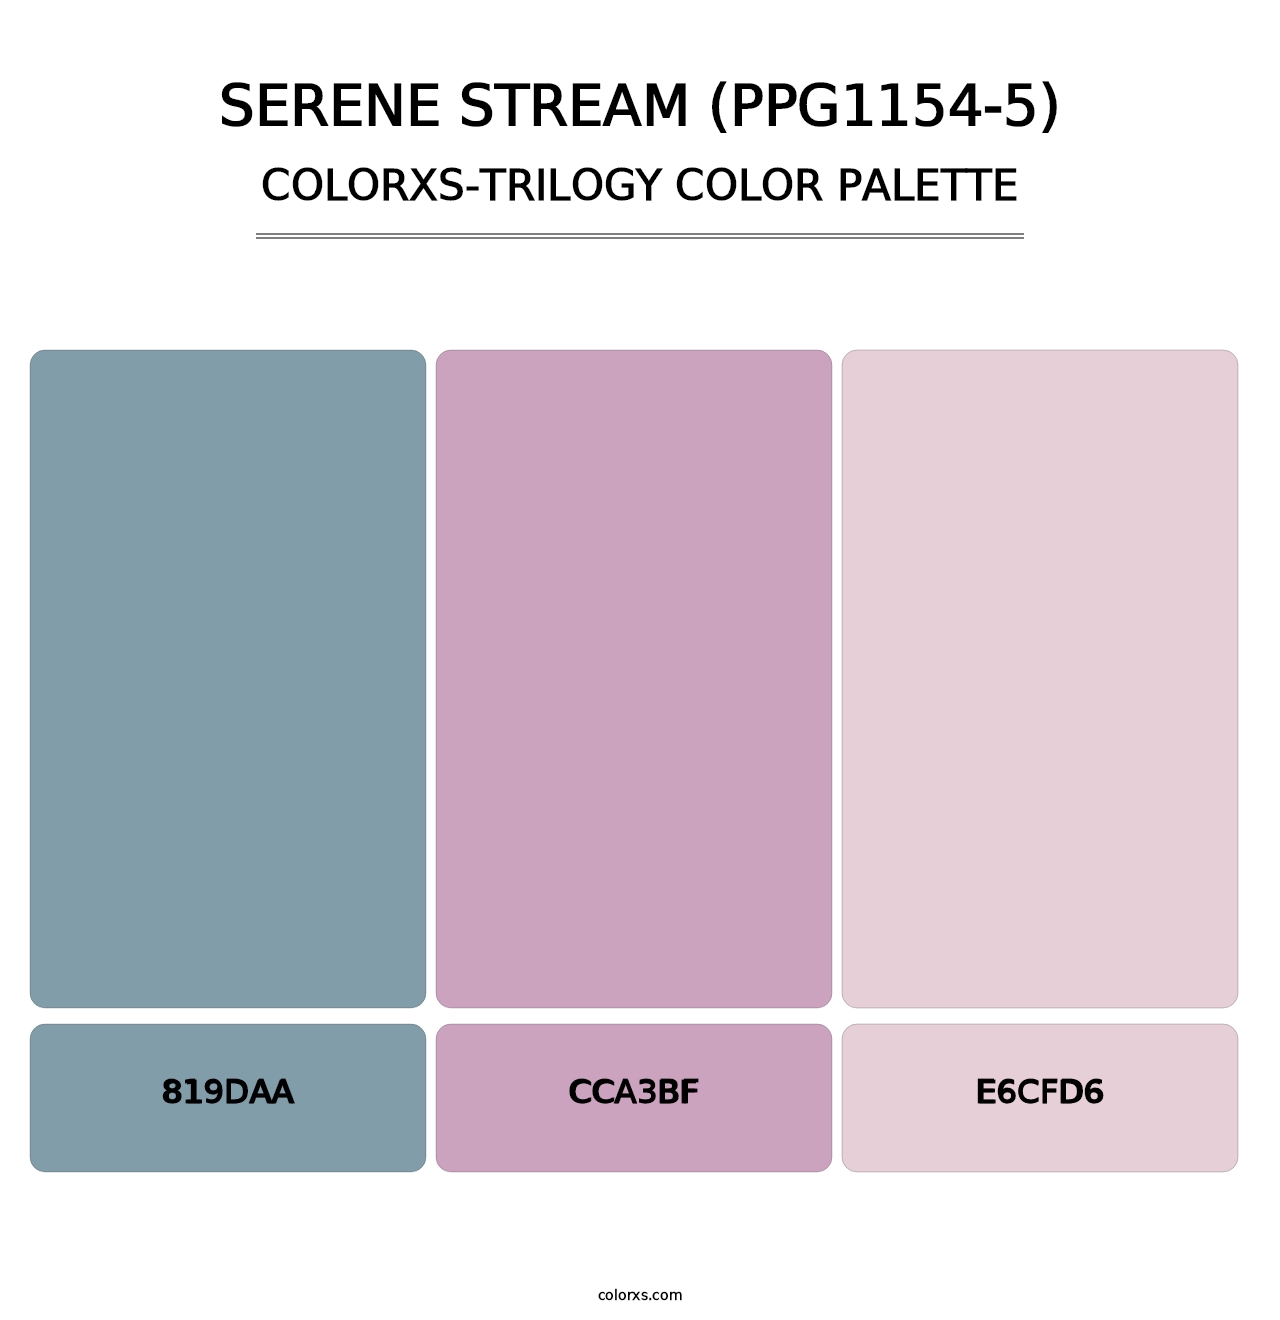 Serene Stream (PPG1154-5) - Colorxs Trilogy Palette